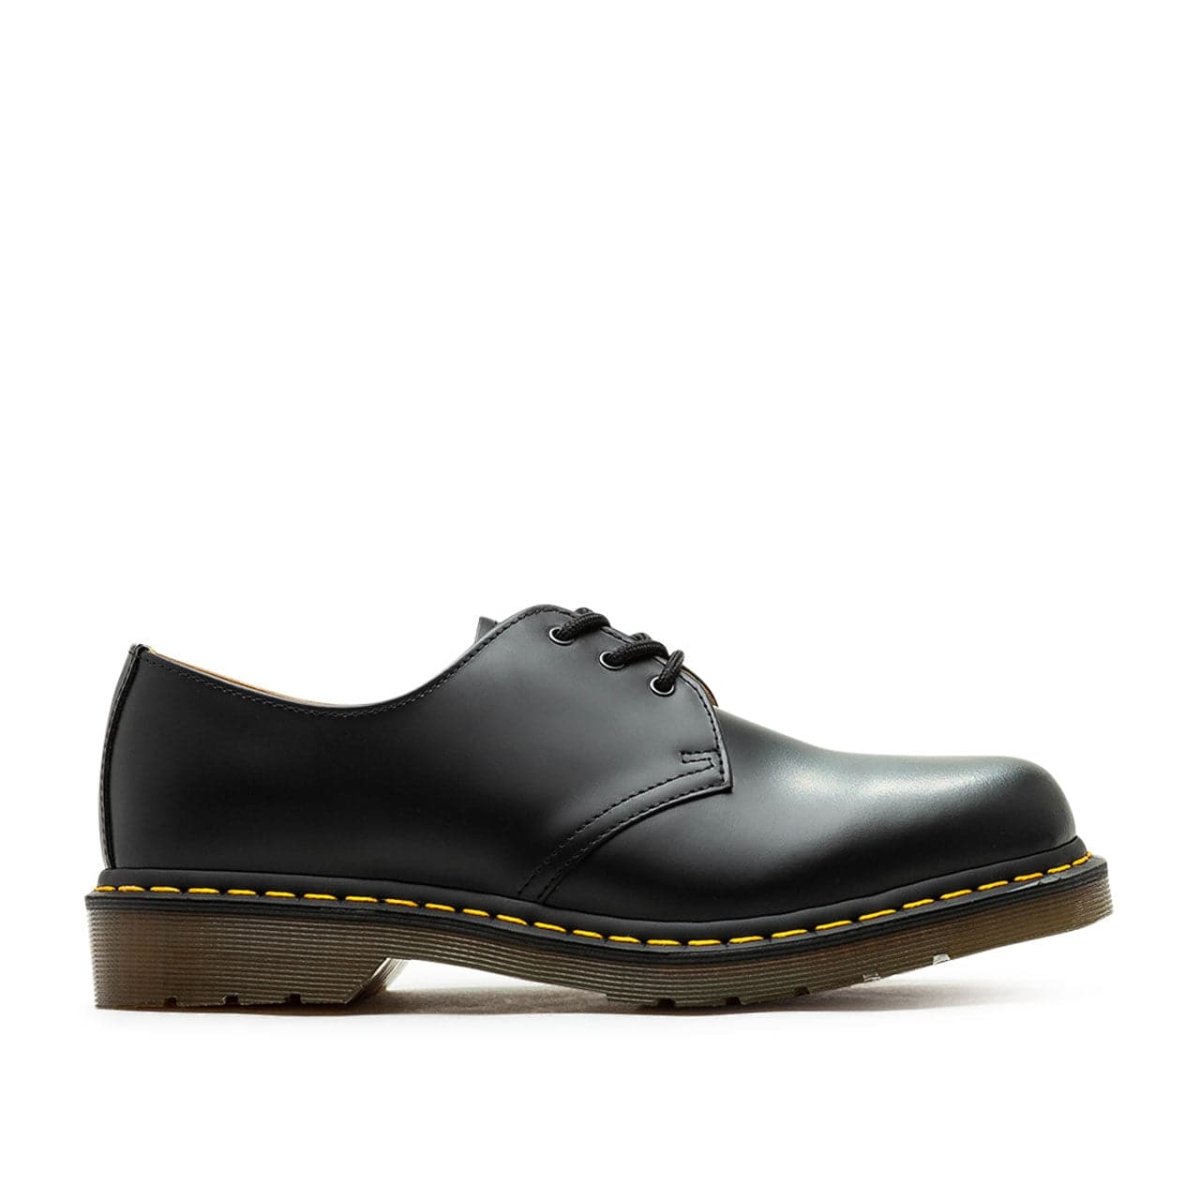 Dr. Martens 1461 Smooth Leather Shoes (Schwarz)  - Allike Store